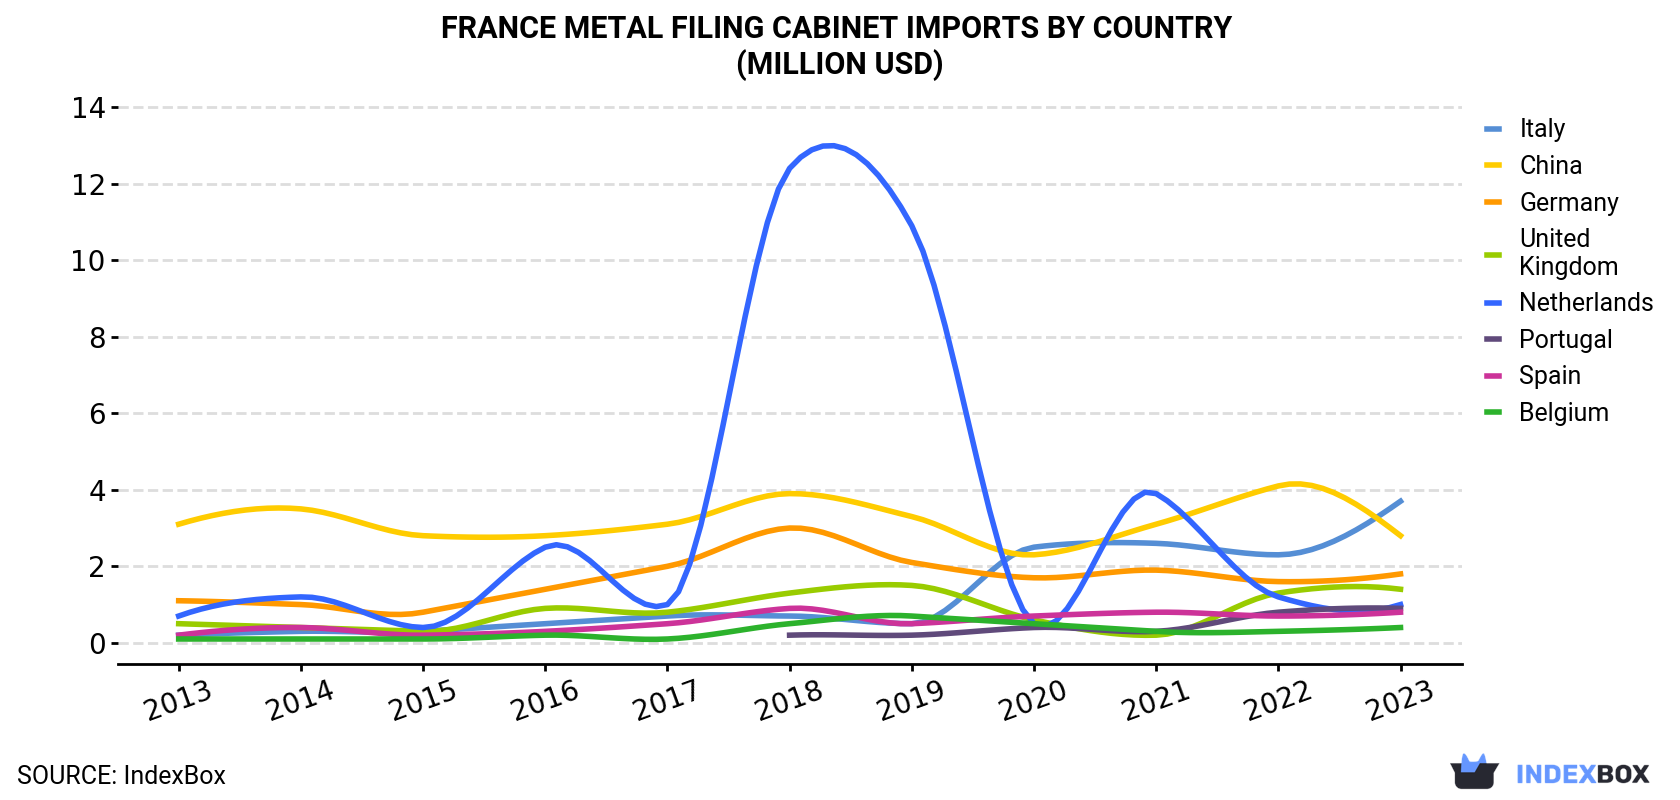 France Metal Filing Cabinet Imports By Country (Million USD)